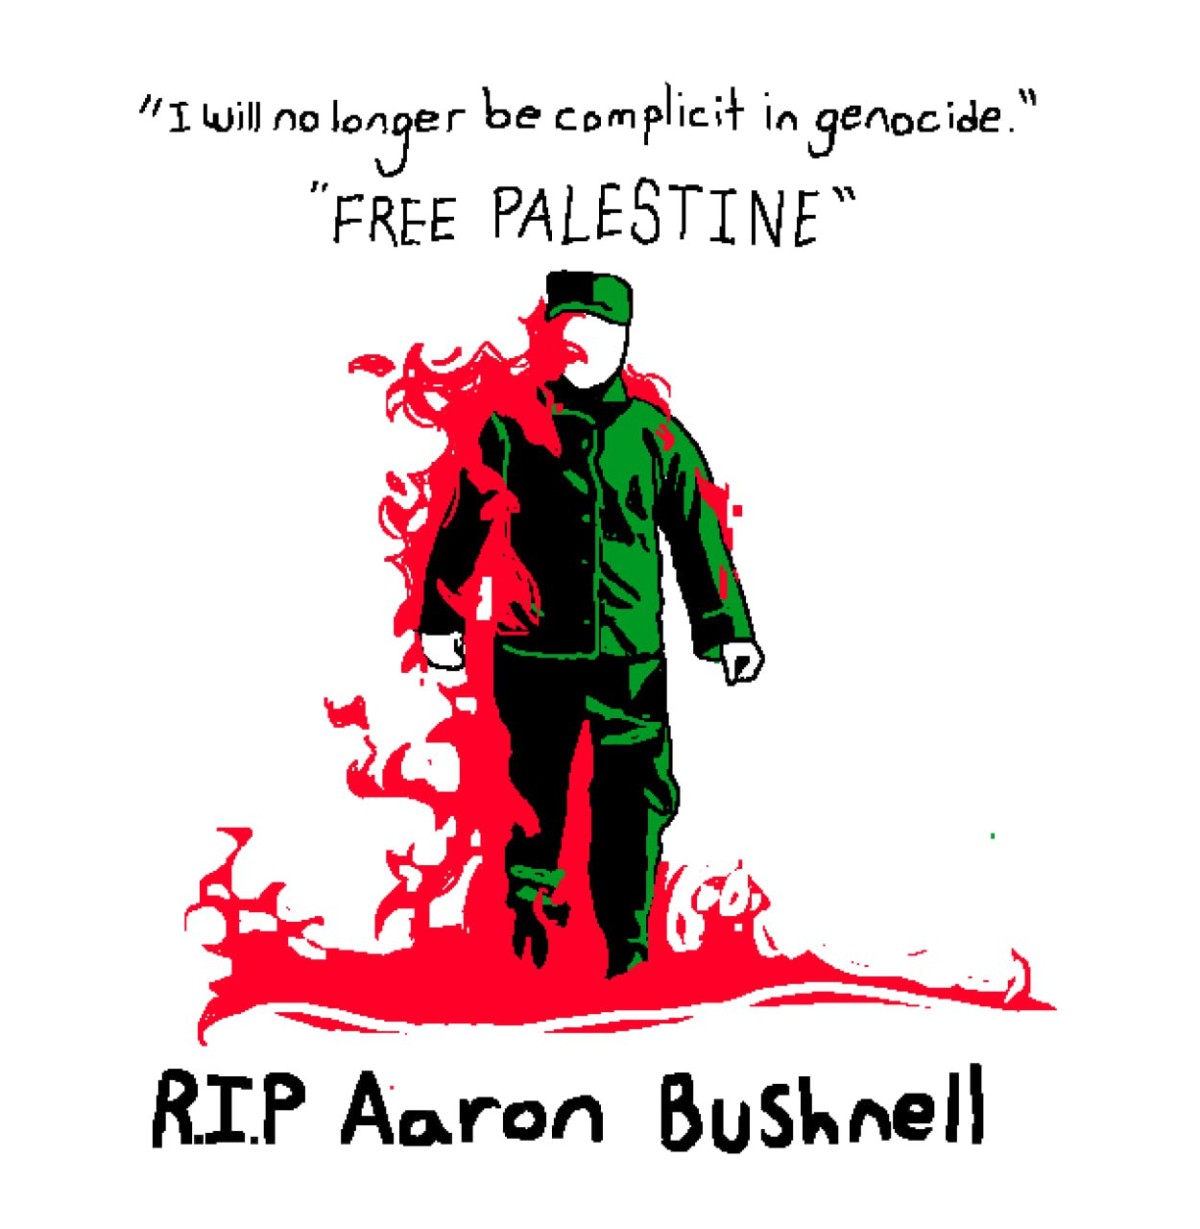 I will no longer be complicit in genocide. "FREE PALESTINE"